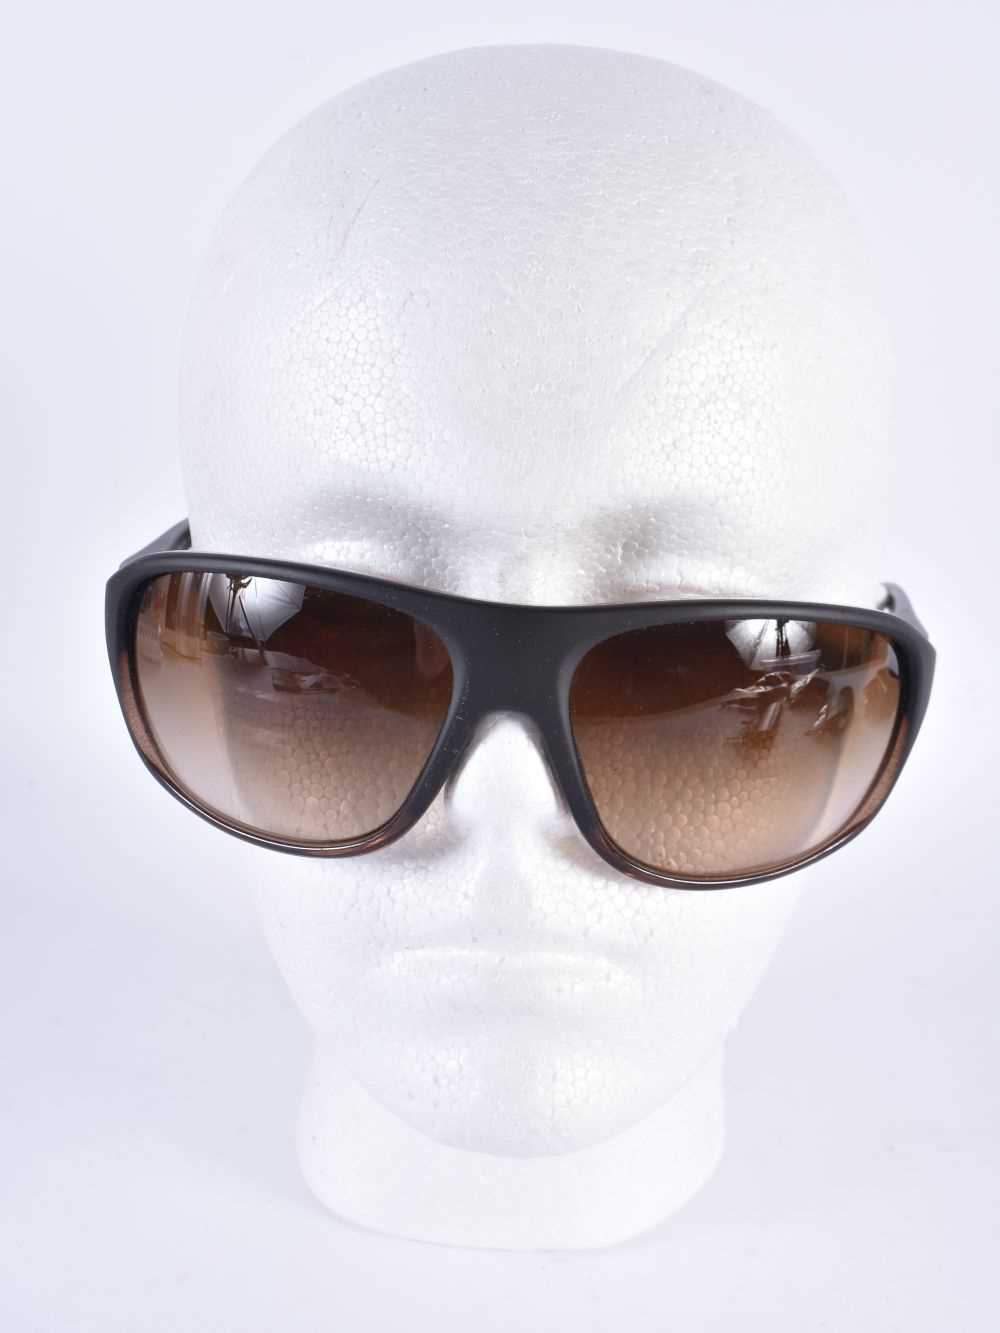 FOUR PAIRS OF RAYBAN SUNGLASSES. 15 cm wide. (4) - Image 2 of 6